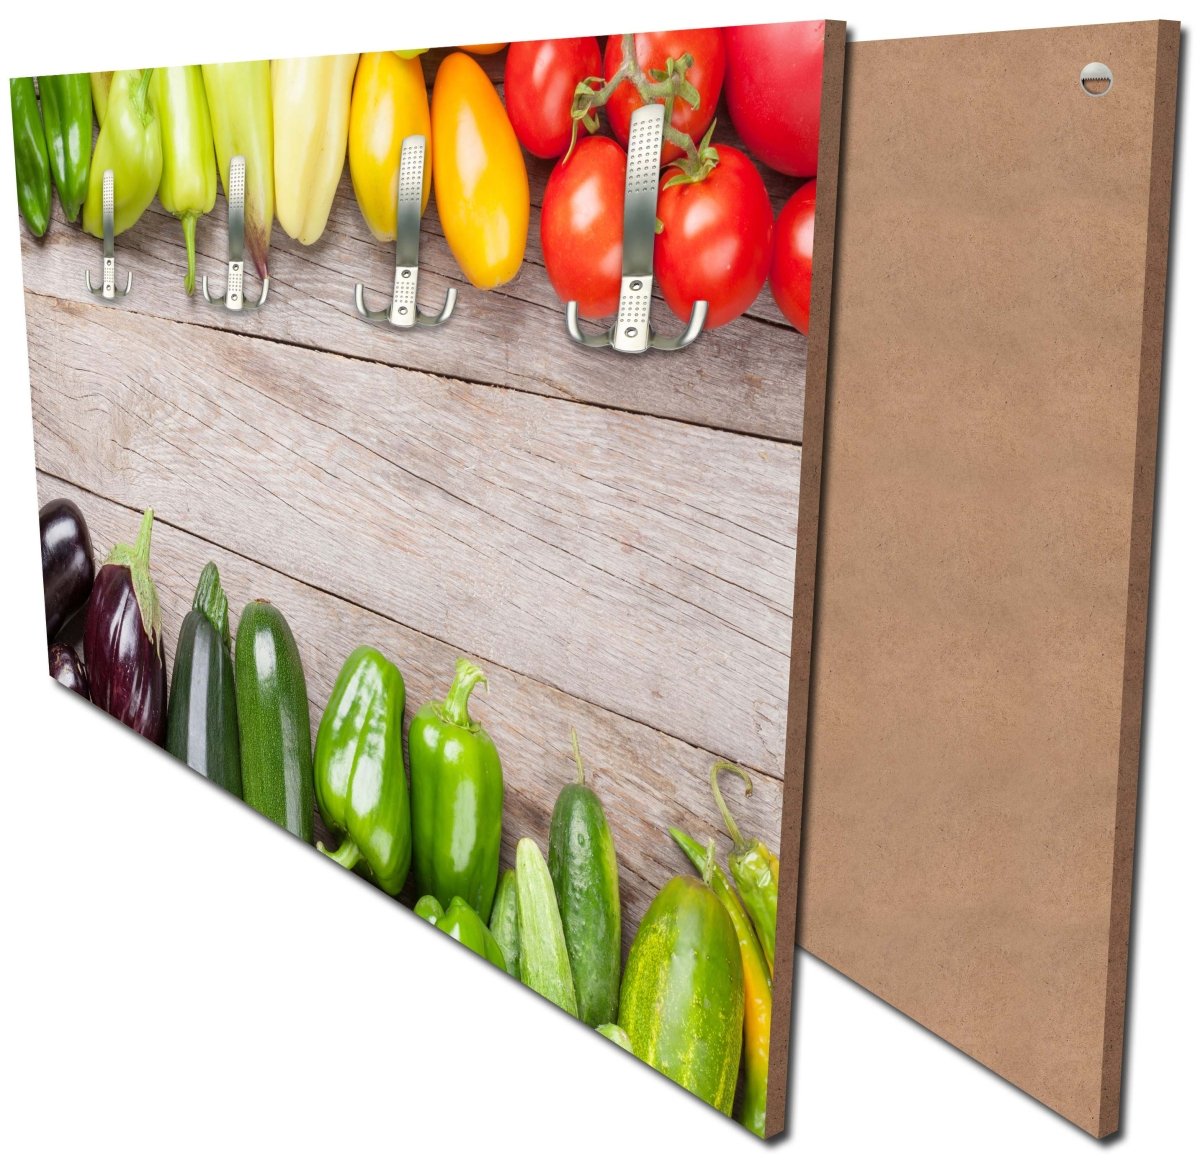 Wardrobe Fresh vegetables on a wooden table M1012